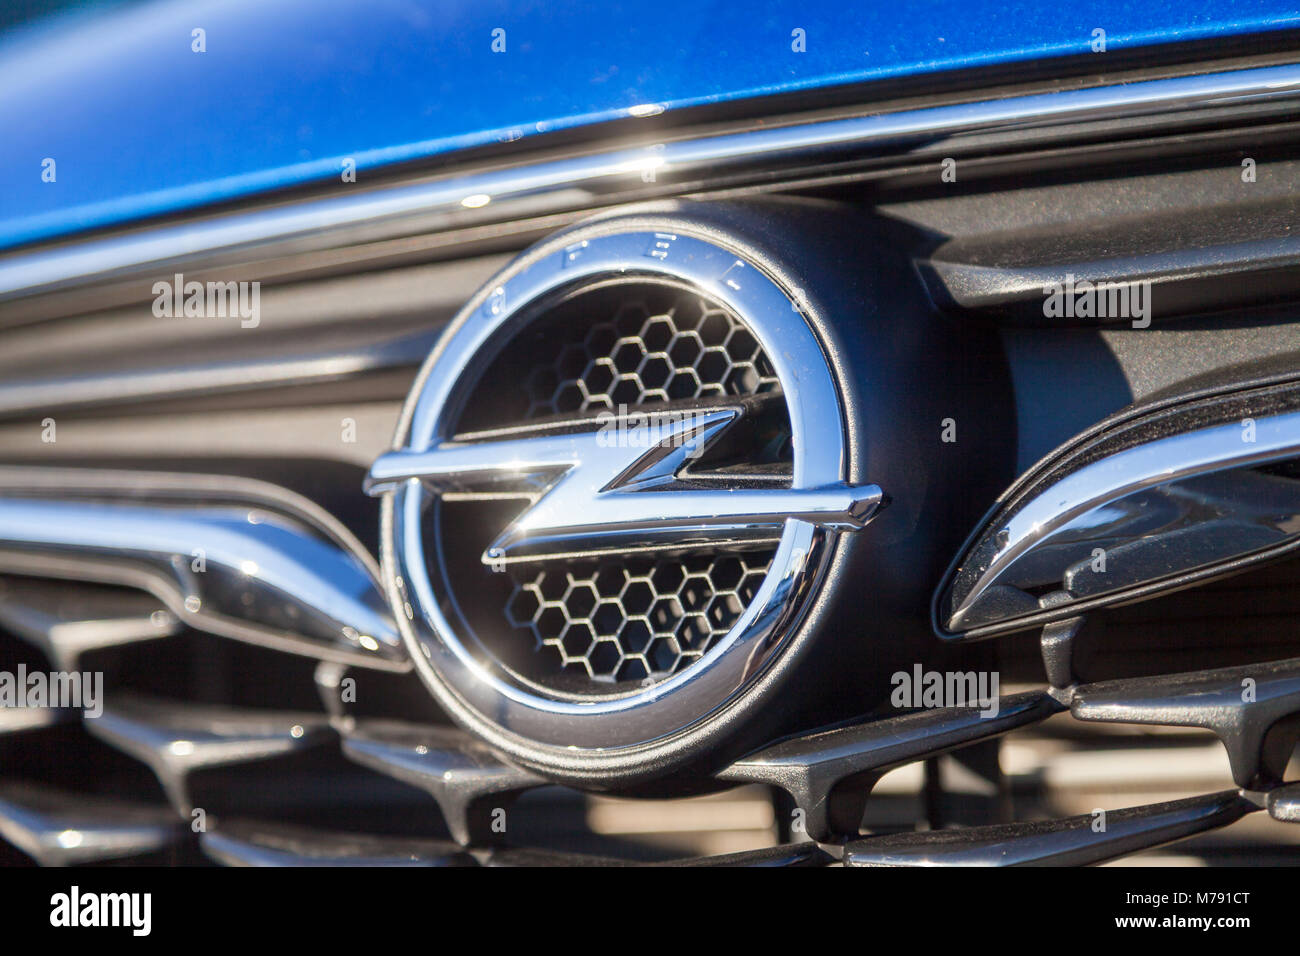 NUERNBERG / GERMANY - MARCH 4, 2018: Opel logo on a car at an Opel car dealer in Germany. Opel Automobile GmbH is a German automobile manufacturer. Stock Photo